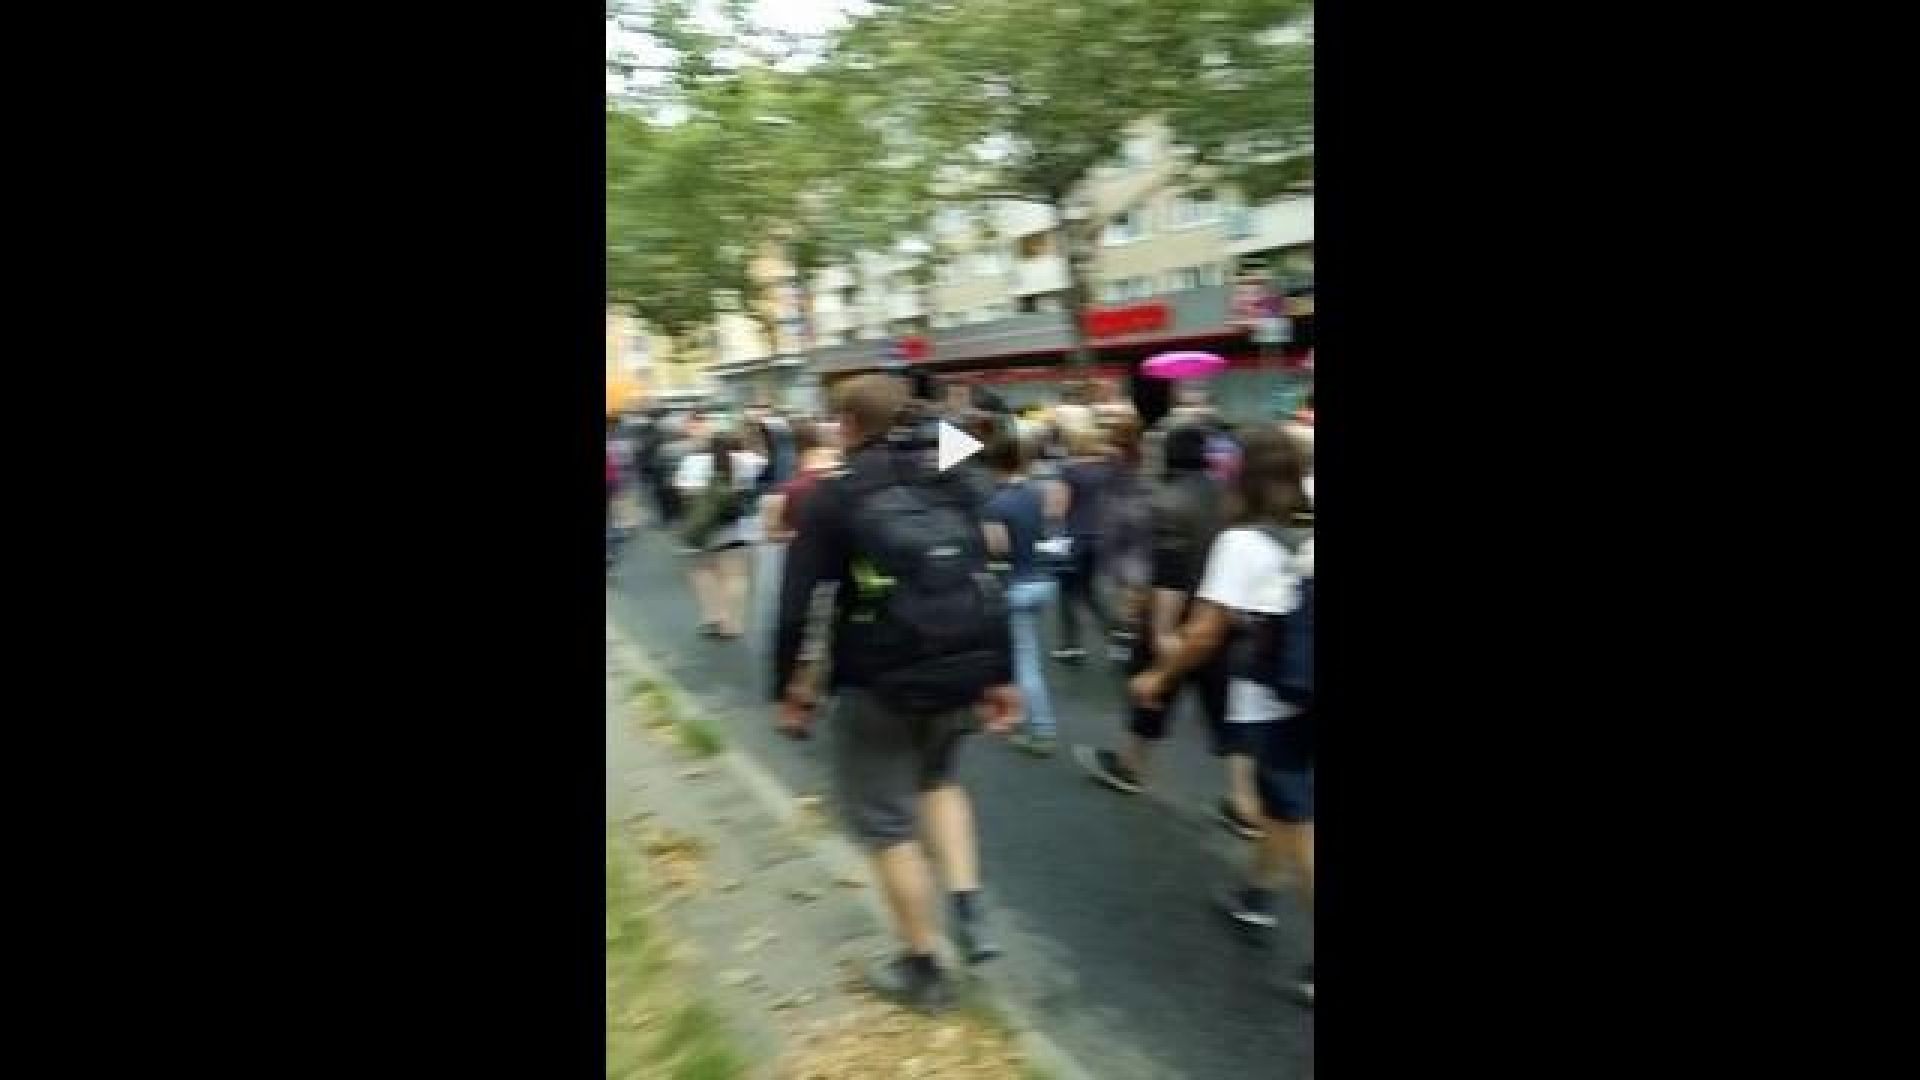 Berlin: German Protest Groups Unite, Despite Police Efforts to Keep Them Separated - Part 1